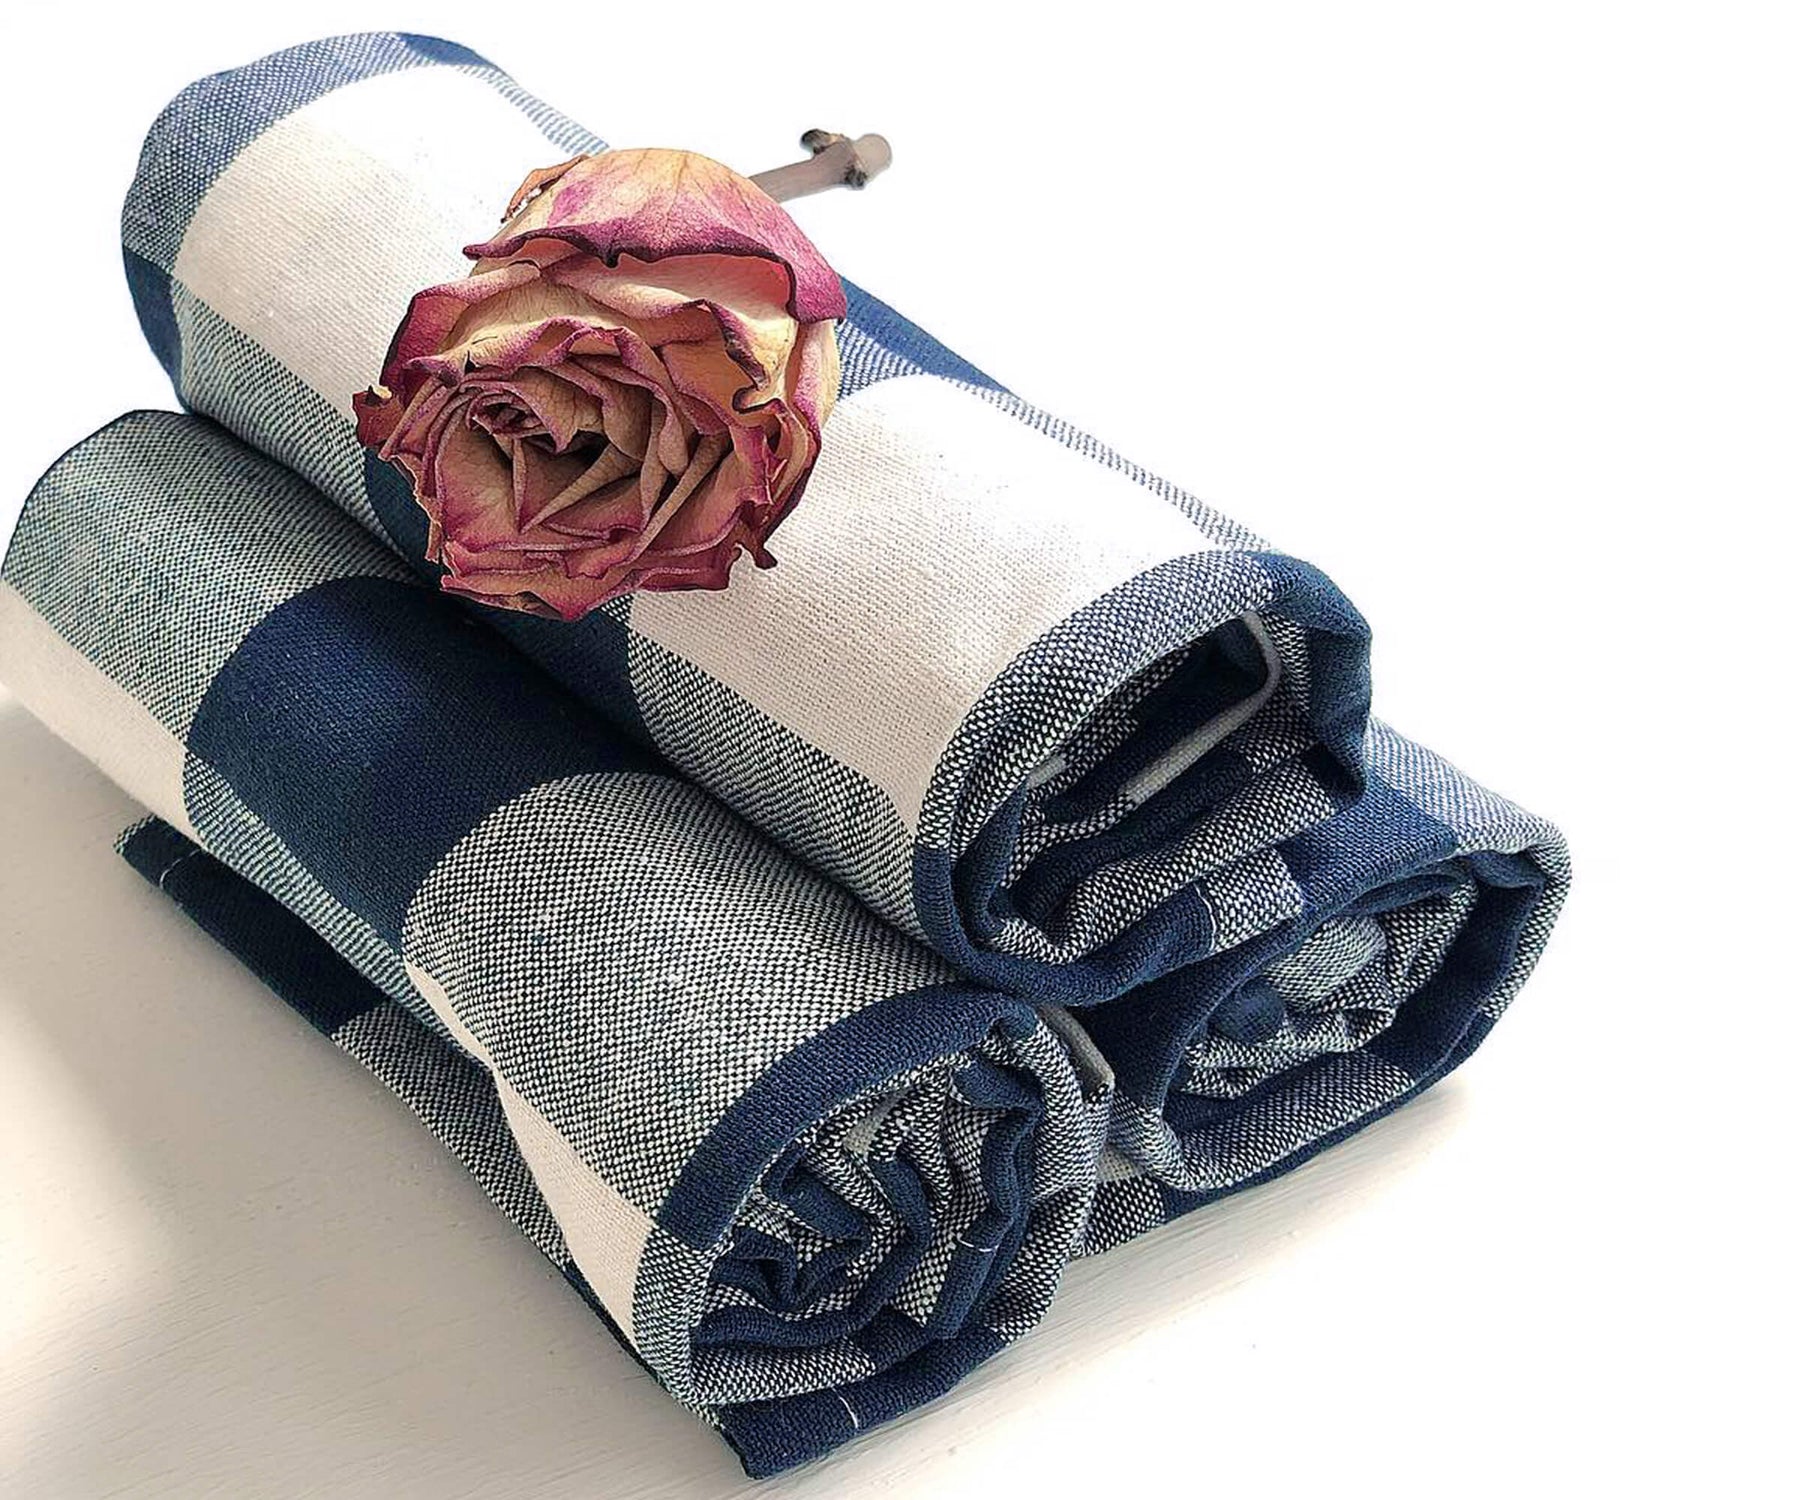 All Cotton and Linen Dark Blue and White Checkered Dish Towels | Set of 3, Cotton Kitchen Towels